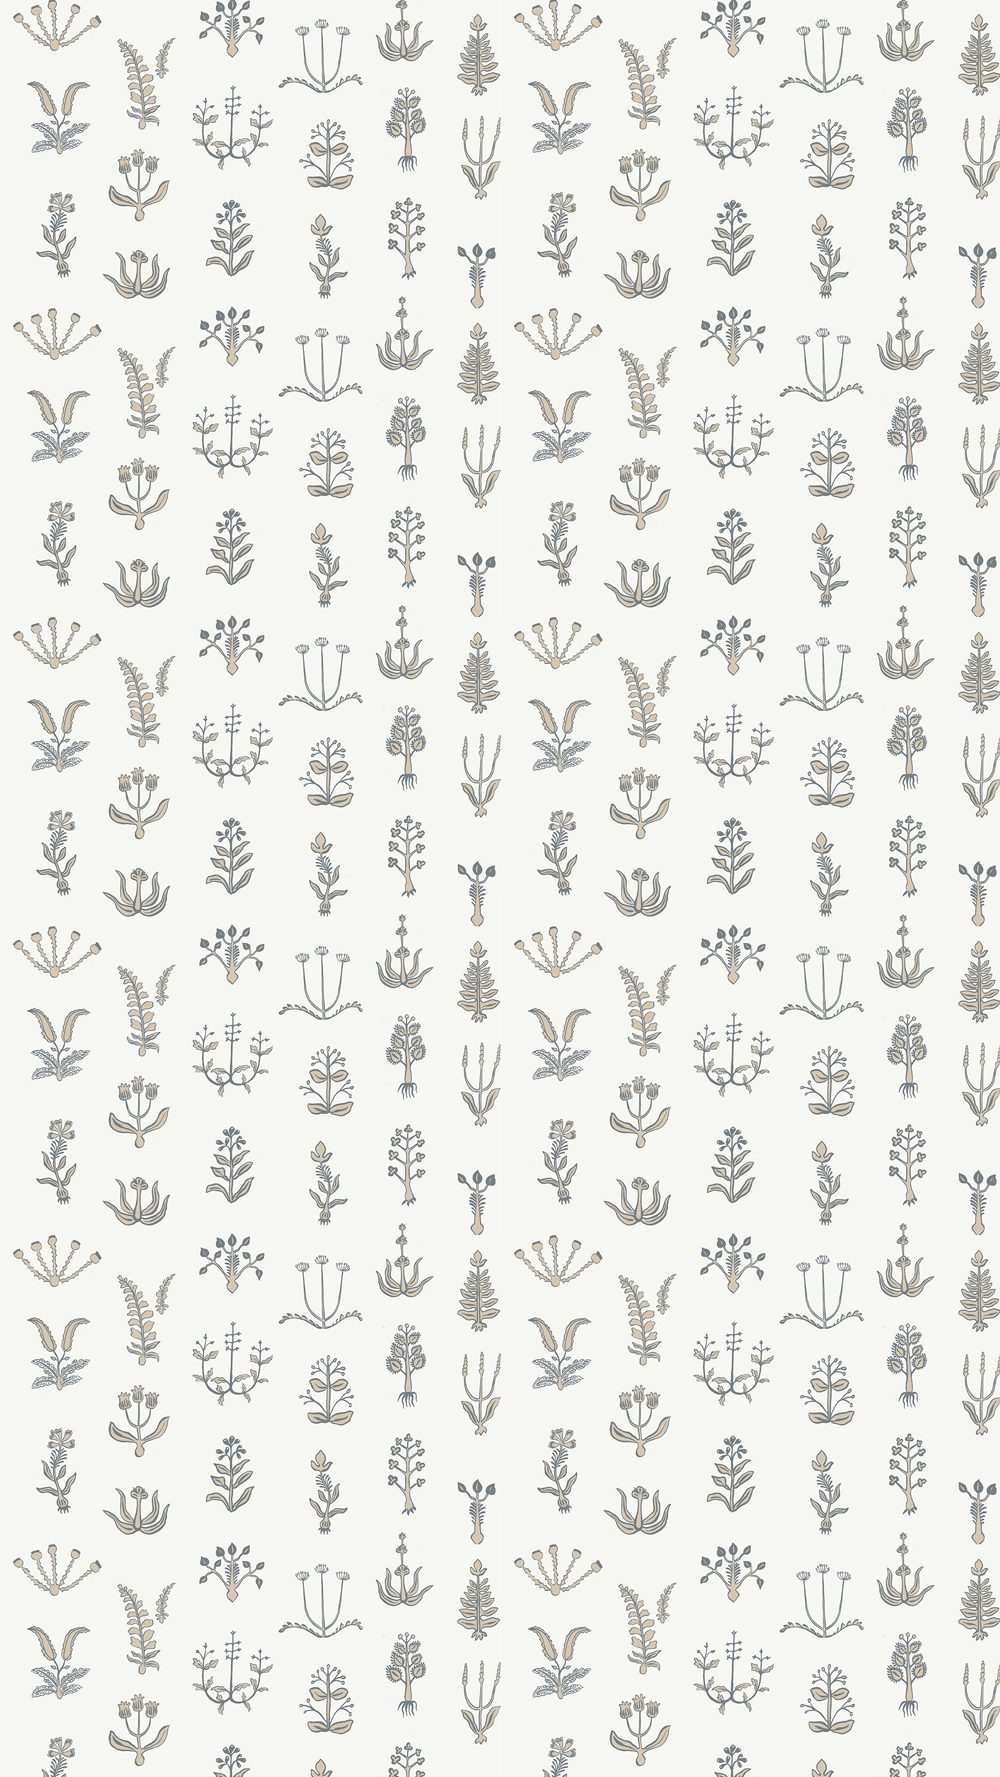 FLO-024-027-037 - Floral Spot - Bude Blue - Cromwell Stone - Hilles White - Small Flat Shot